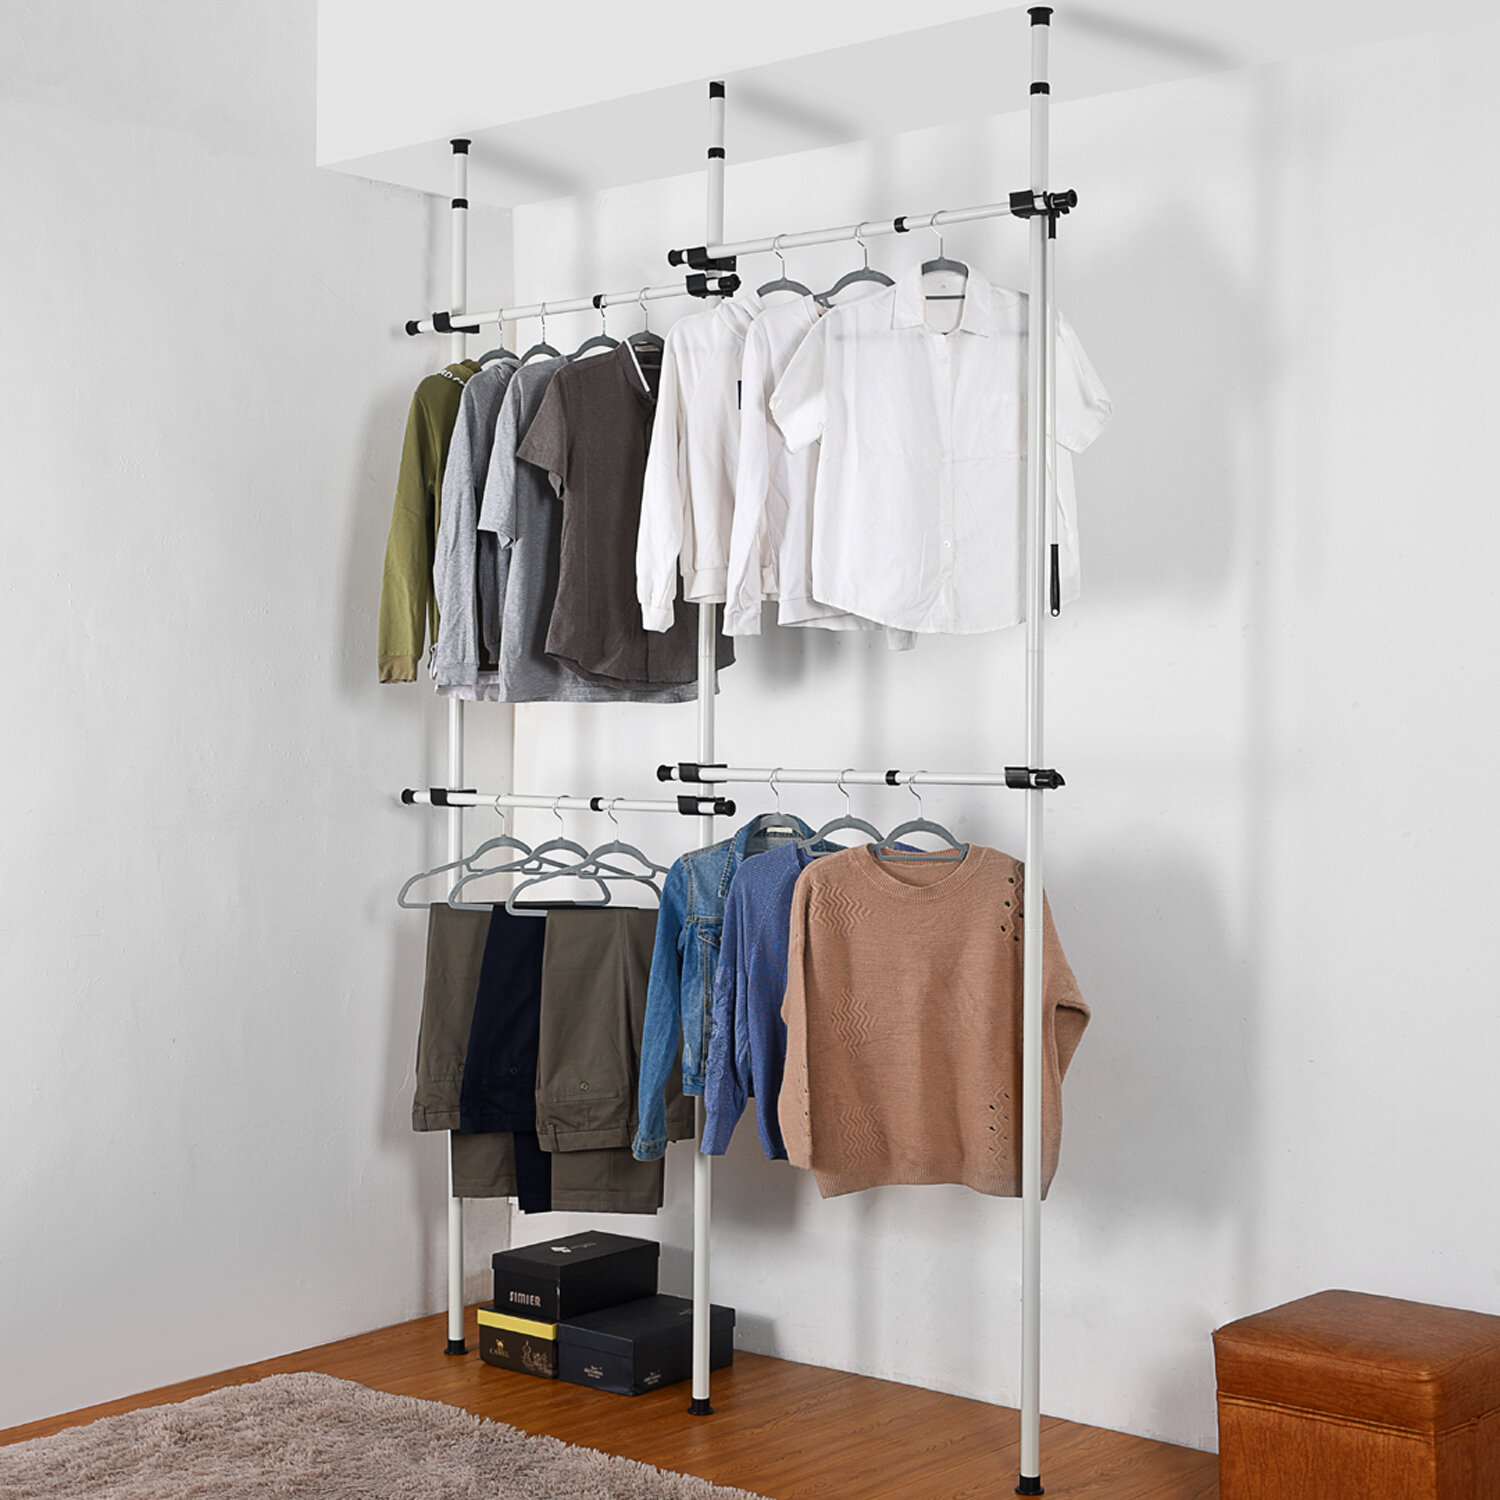 EXTENSION POLES FOR GARMENT CLOTHES RAIL HEAVY DUTY COMES IN PAIR 